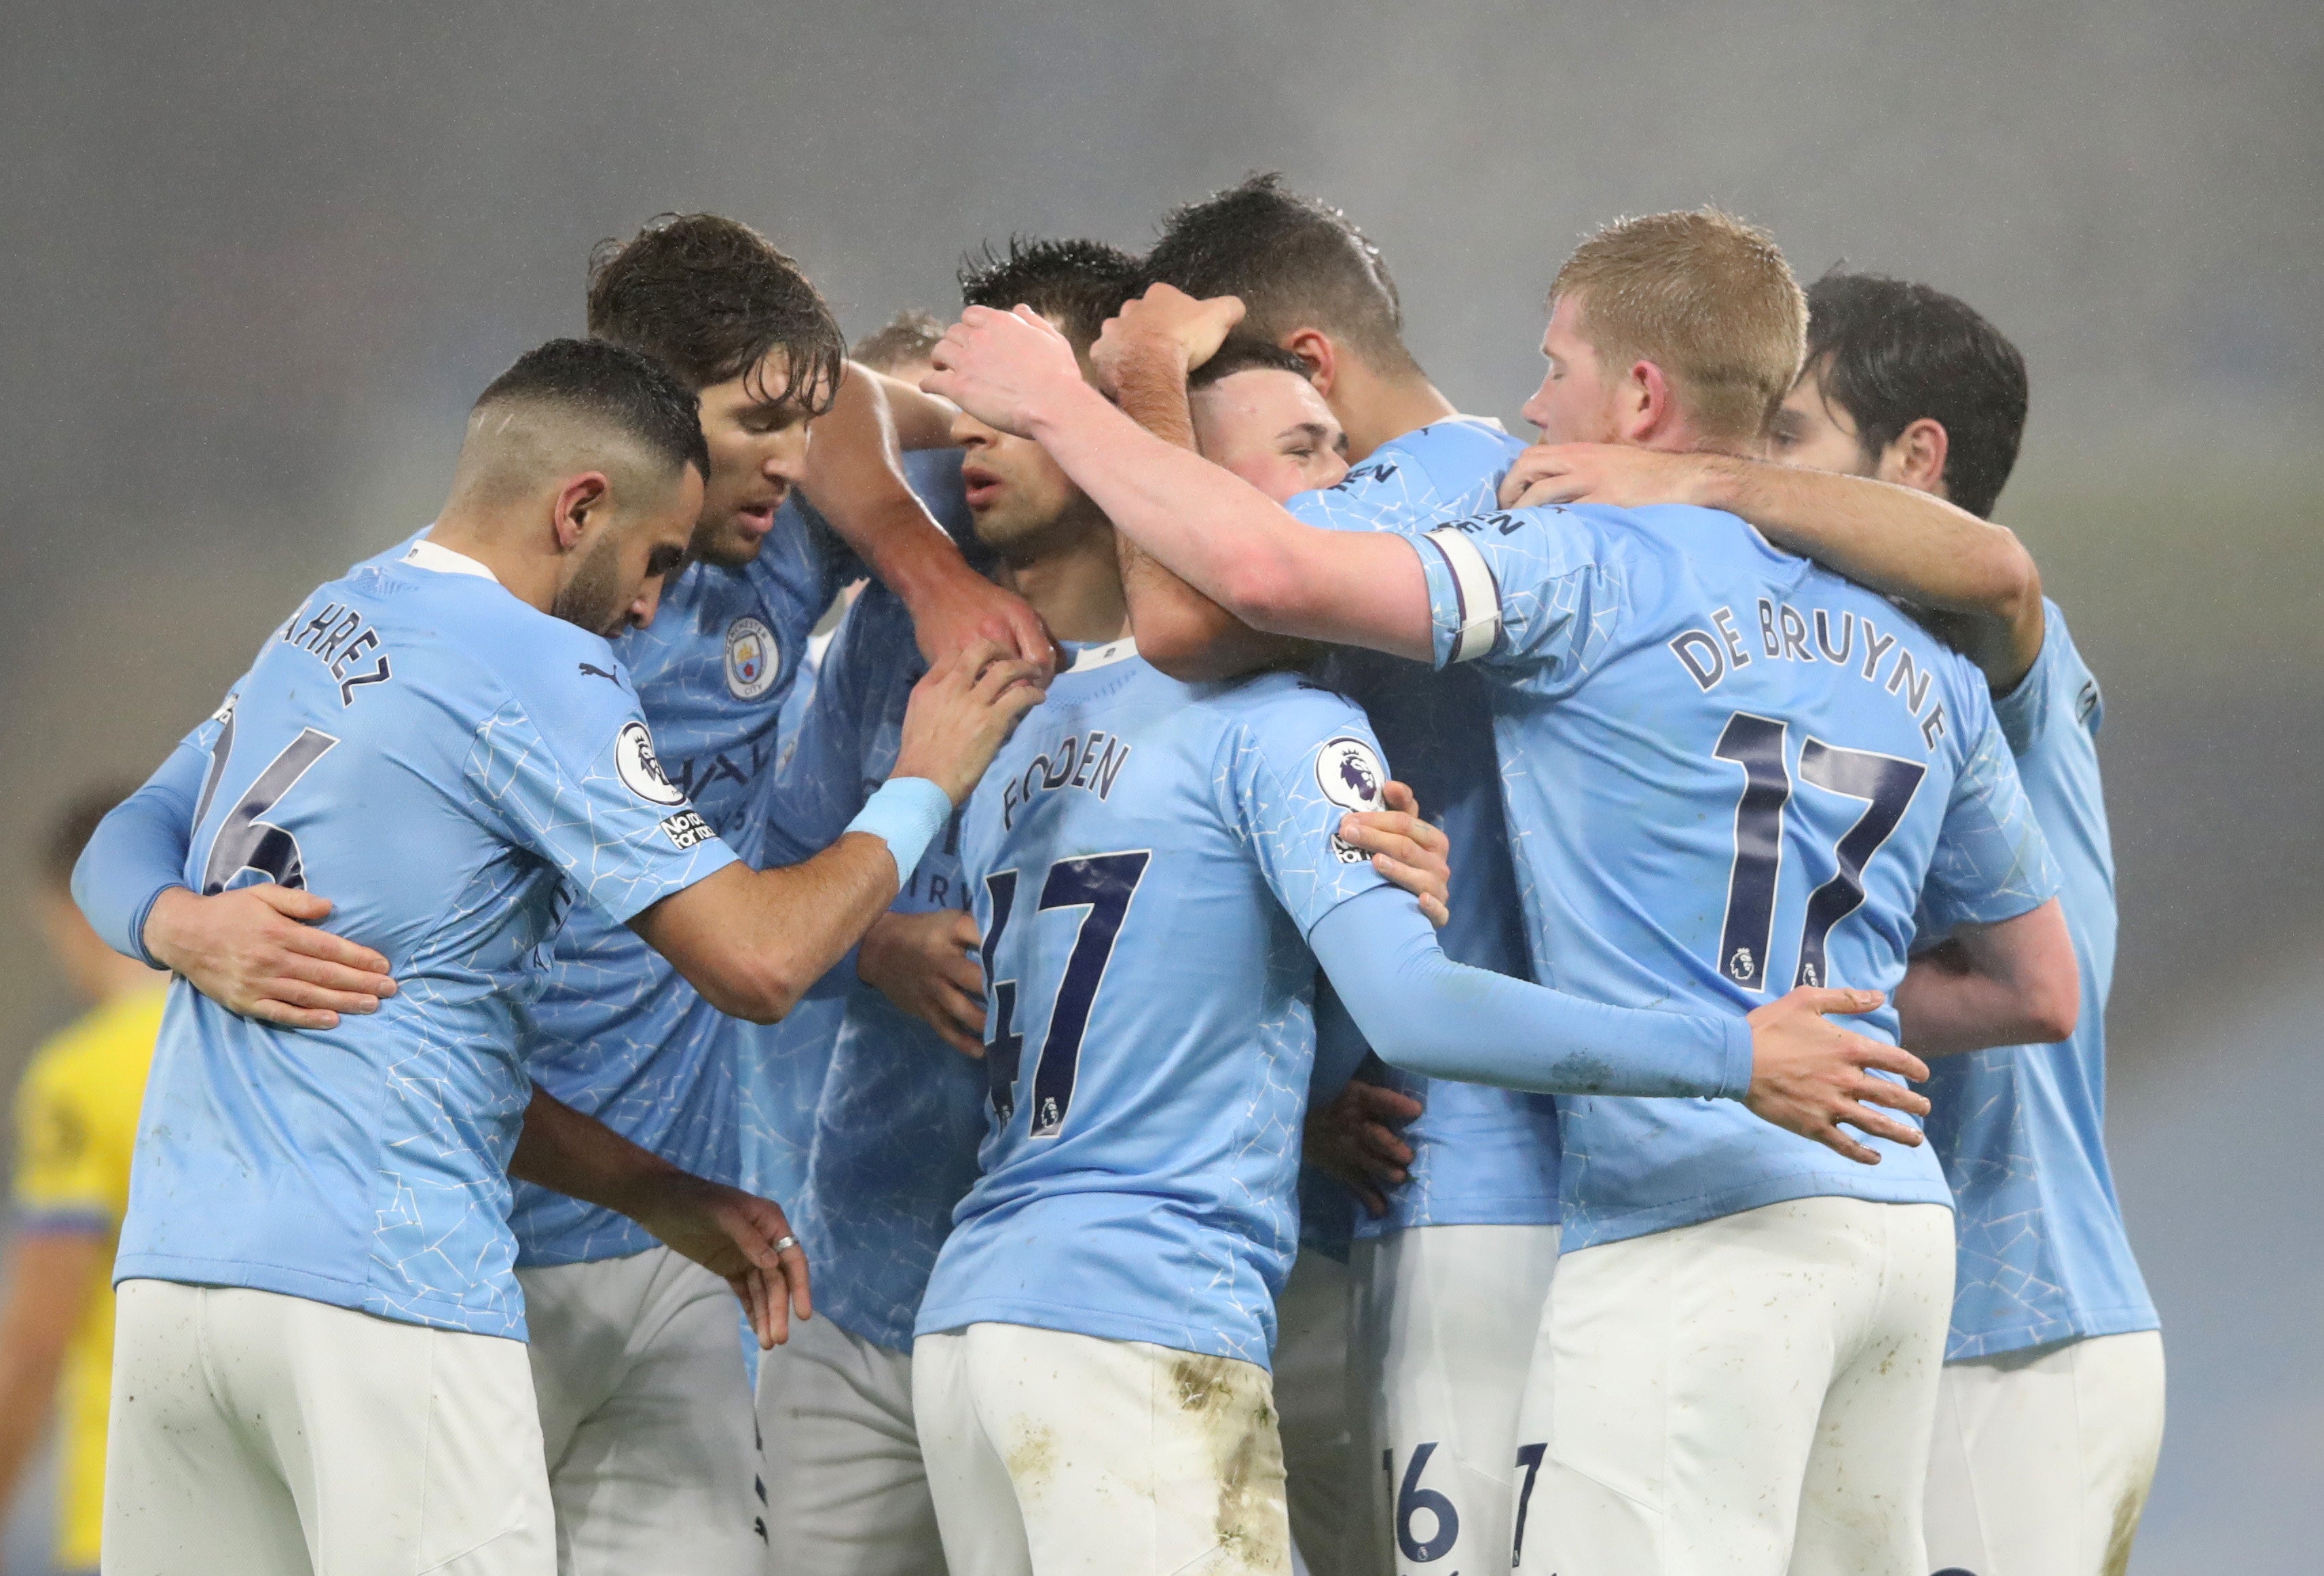 Manchester City players celebrate with a group embrace